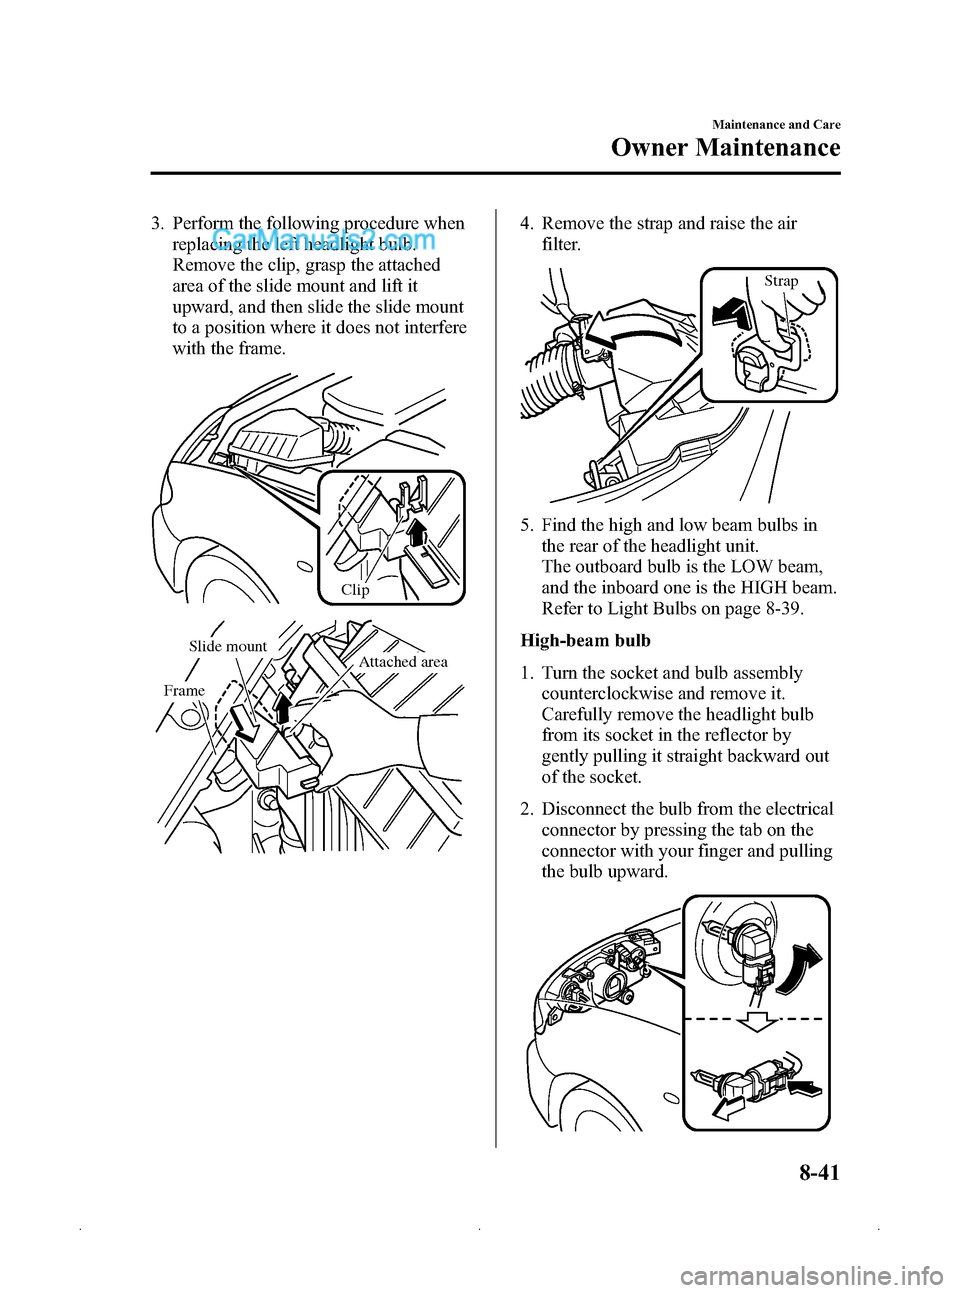 MAZDA MODEL MAZDASPEED 3 2009   (in English) User Guide Black plate (327,1)
3. Perform the following procedure whenreplacing the left headlight bulb.
Remove the clip, grasp the attached
area of the slide mount and lift it
upward, and then slide the slide m